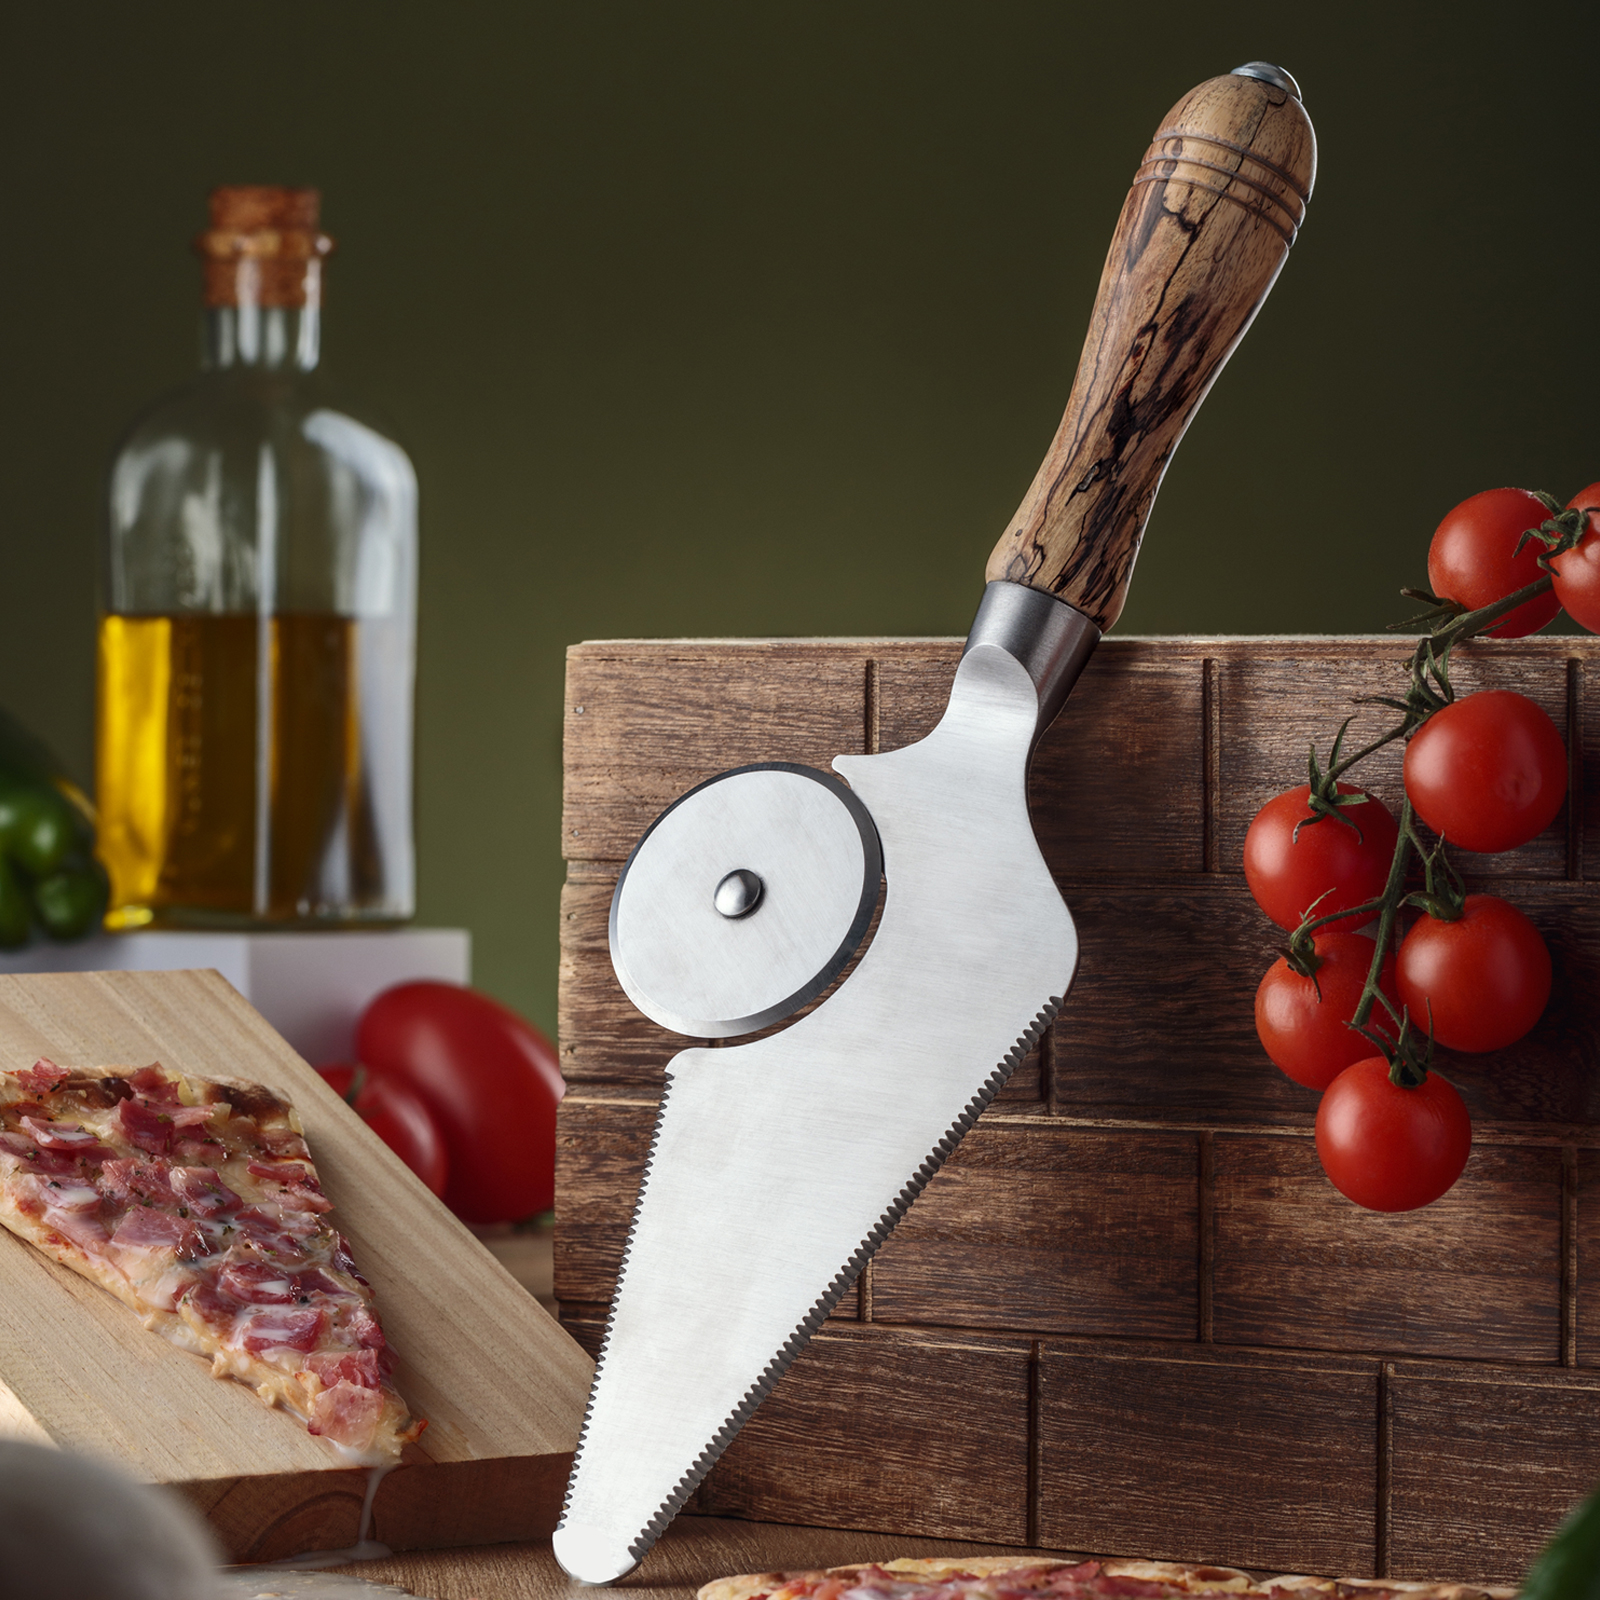 How to Sharpen a Pizza Cutter: Slice through Your Pizza with Ease